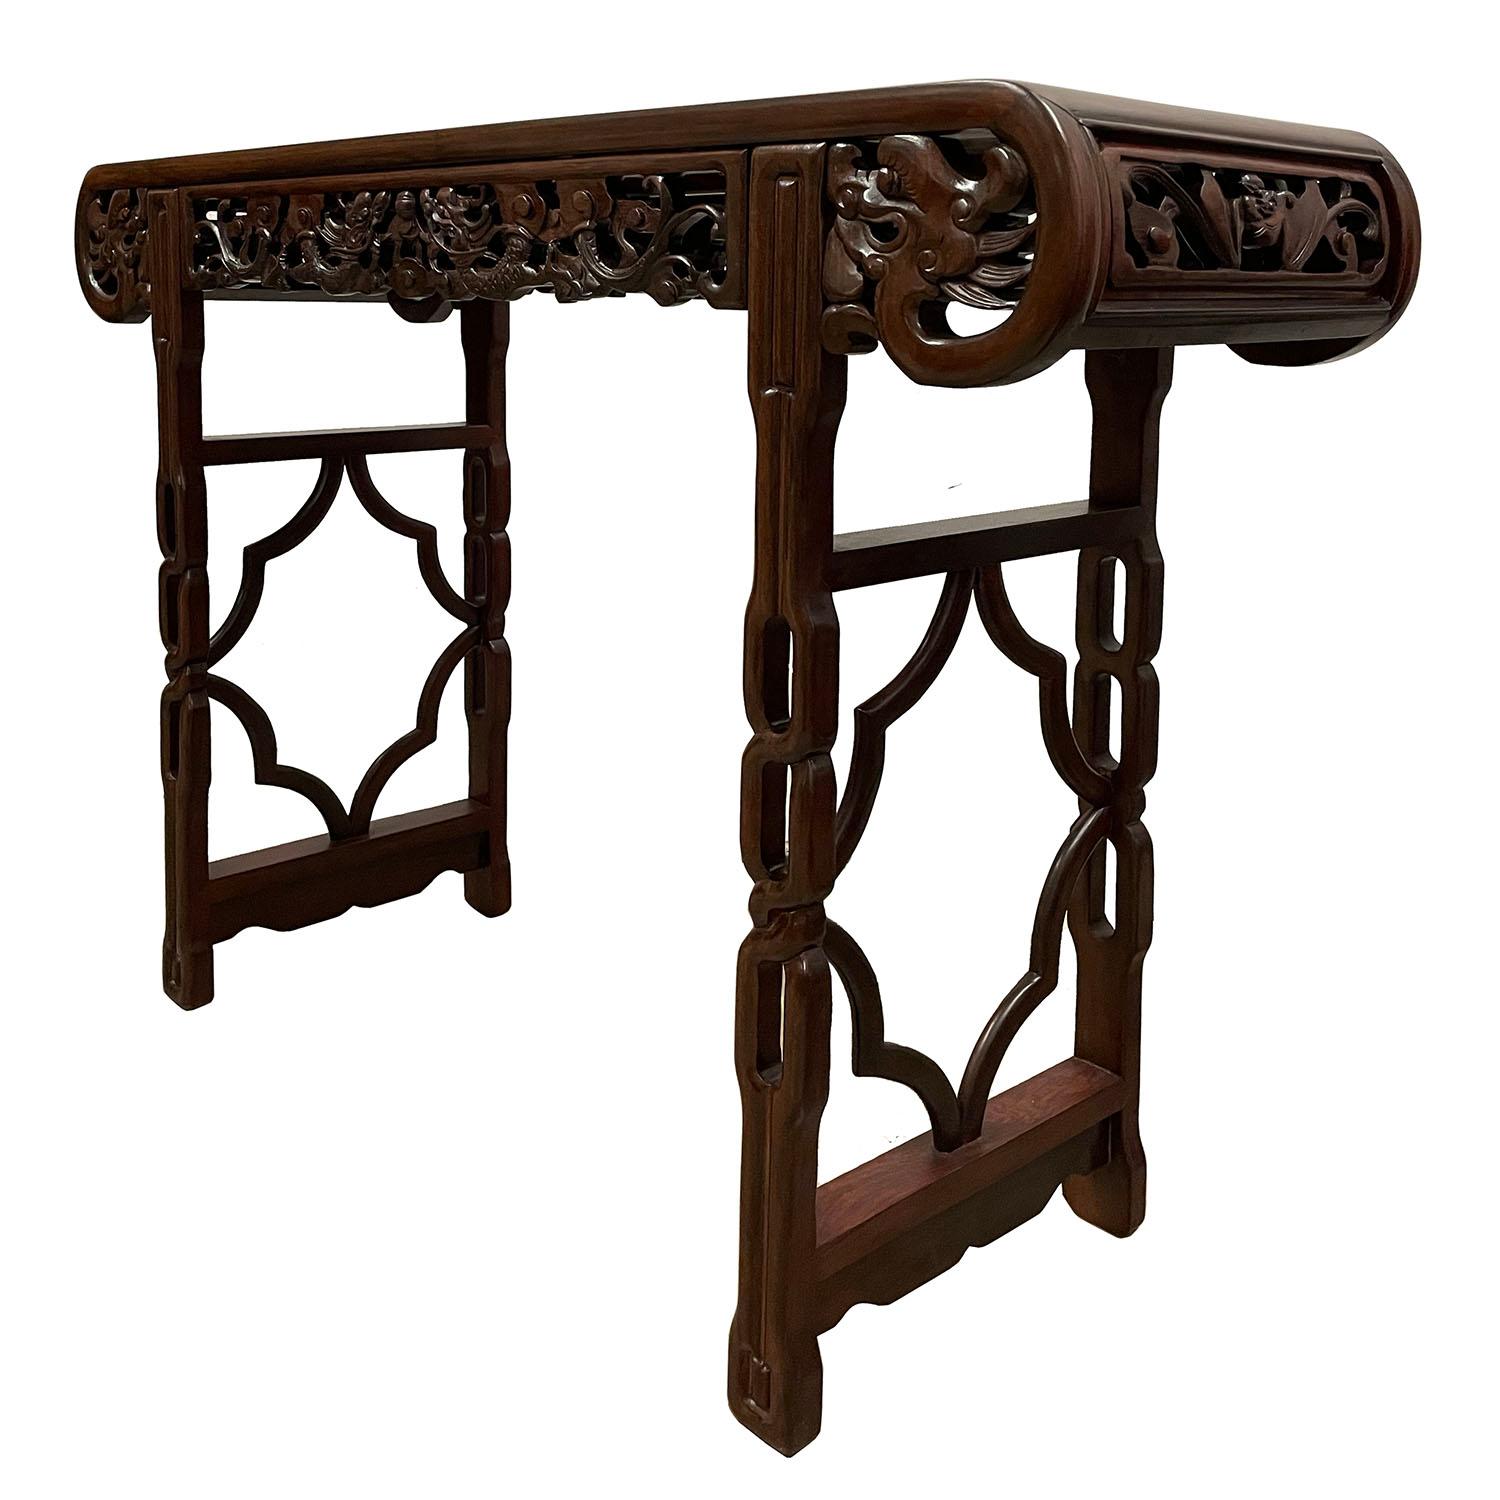 his carved Altar table from China was made from solid Rosewood in about 1900 - 1940's and still maintained very good condition. This table has beautiful open carving works of two dragons playing fire balls on both sides. Very details. Also, there